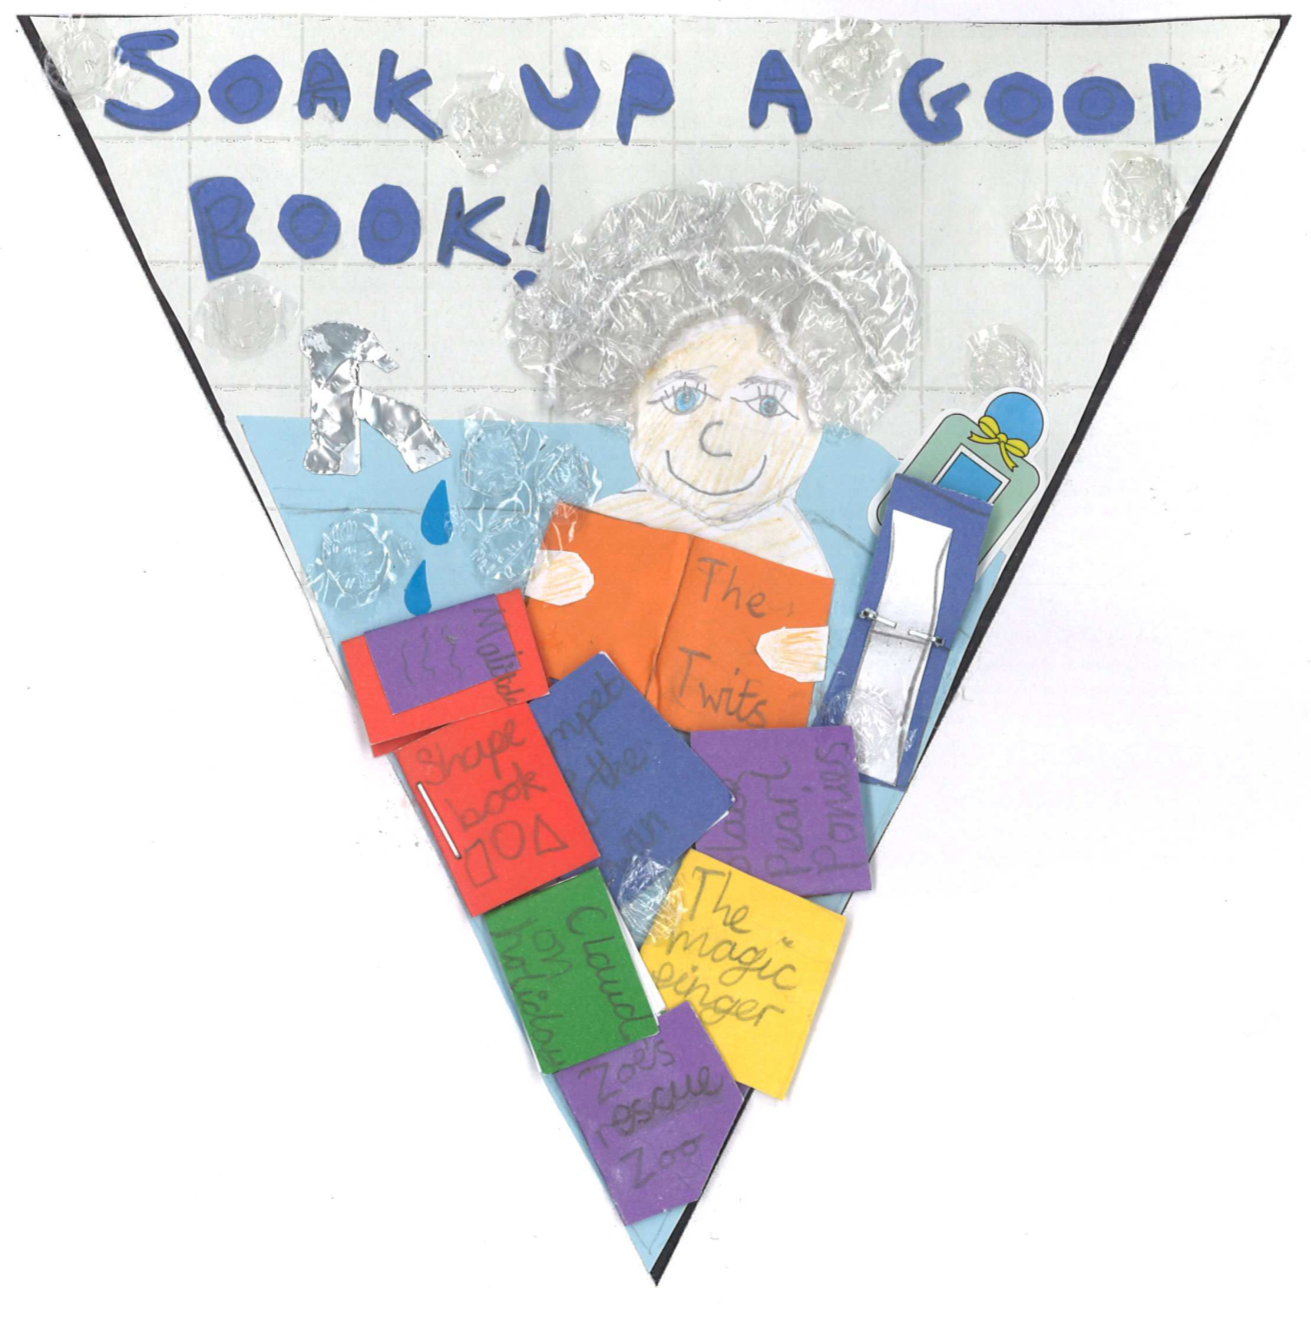 One of the winning World Book Day competition designs